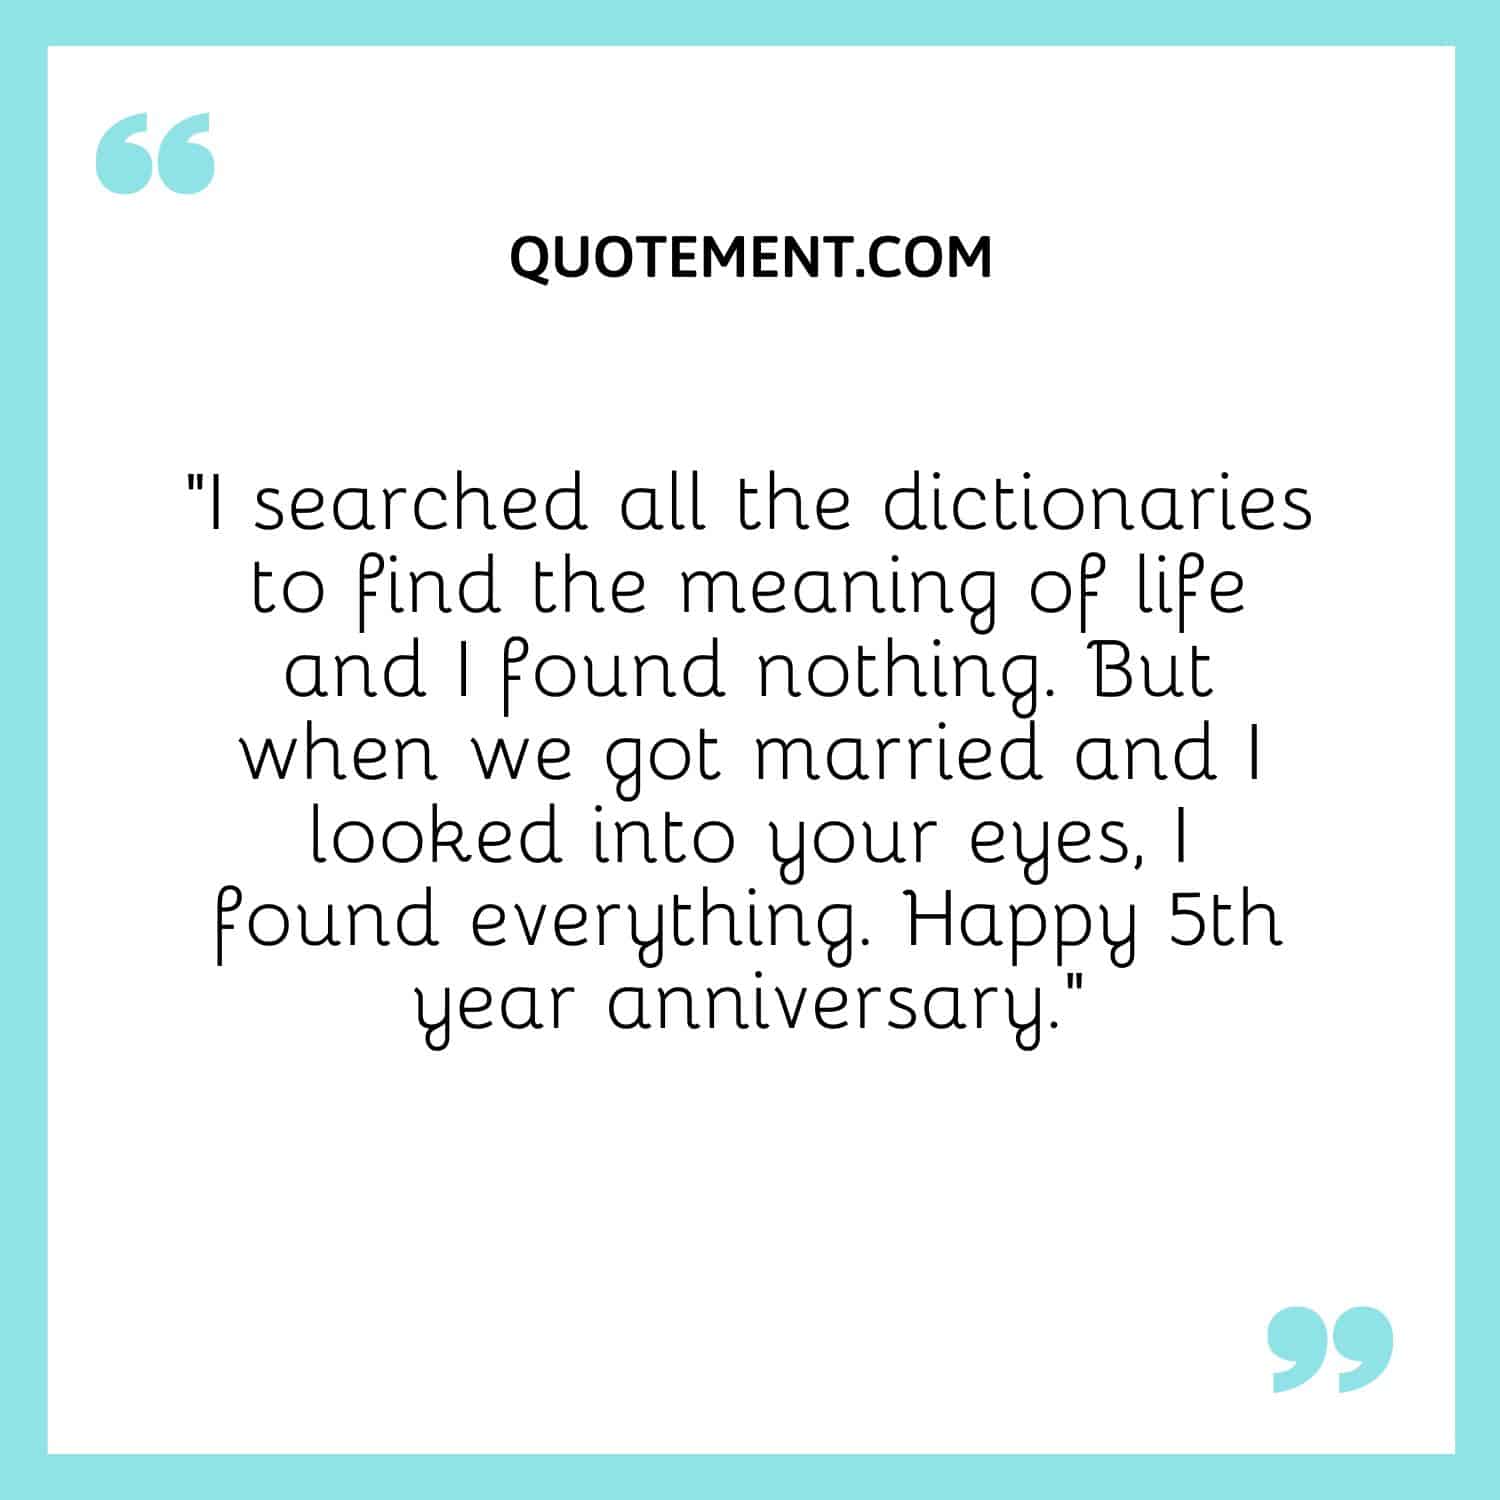 “I searched all the dictionaries to find the meaning of life and I found nothing. But when we got married and I looked into your eyes, I found everything.